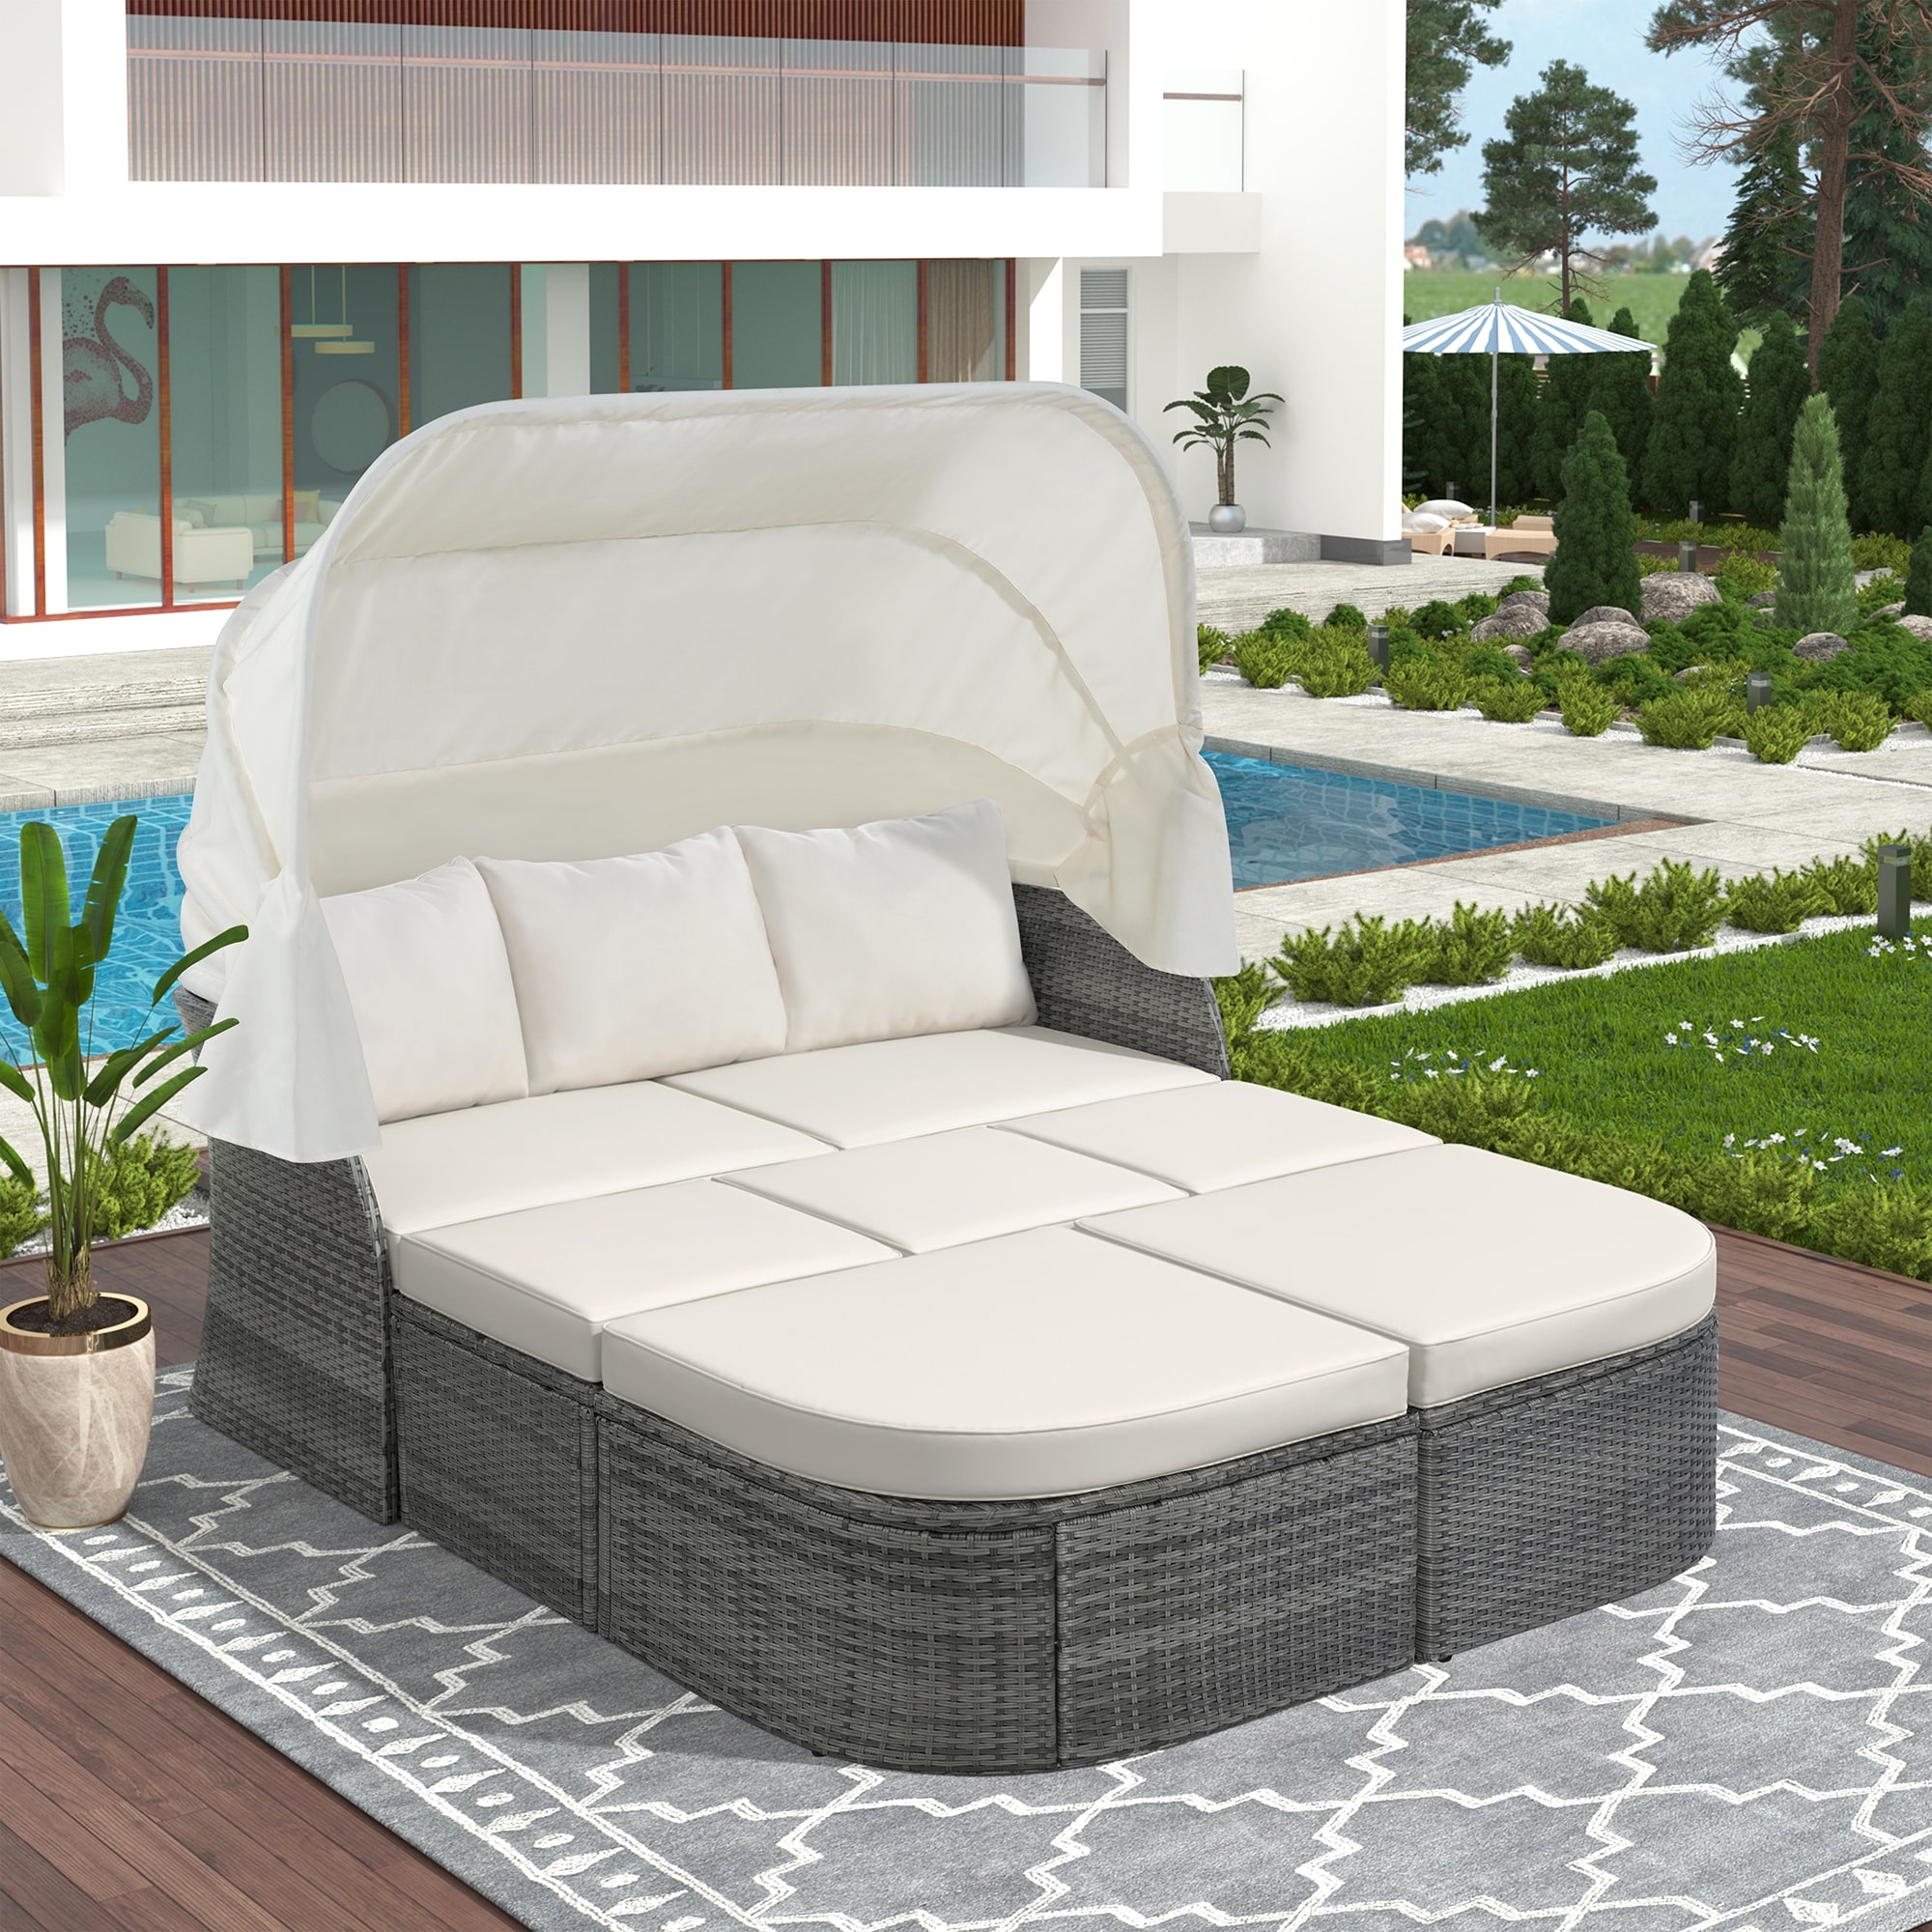 Outdoor Patio Daybed With Retractable Canopy wicker Furniture Conversation Set